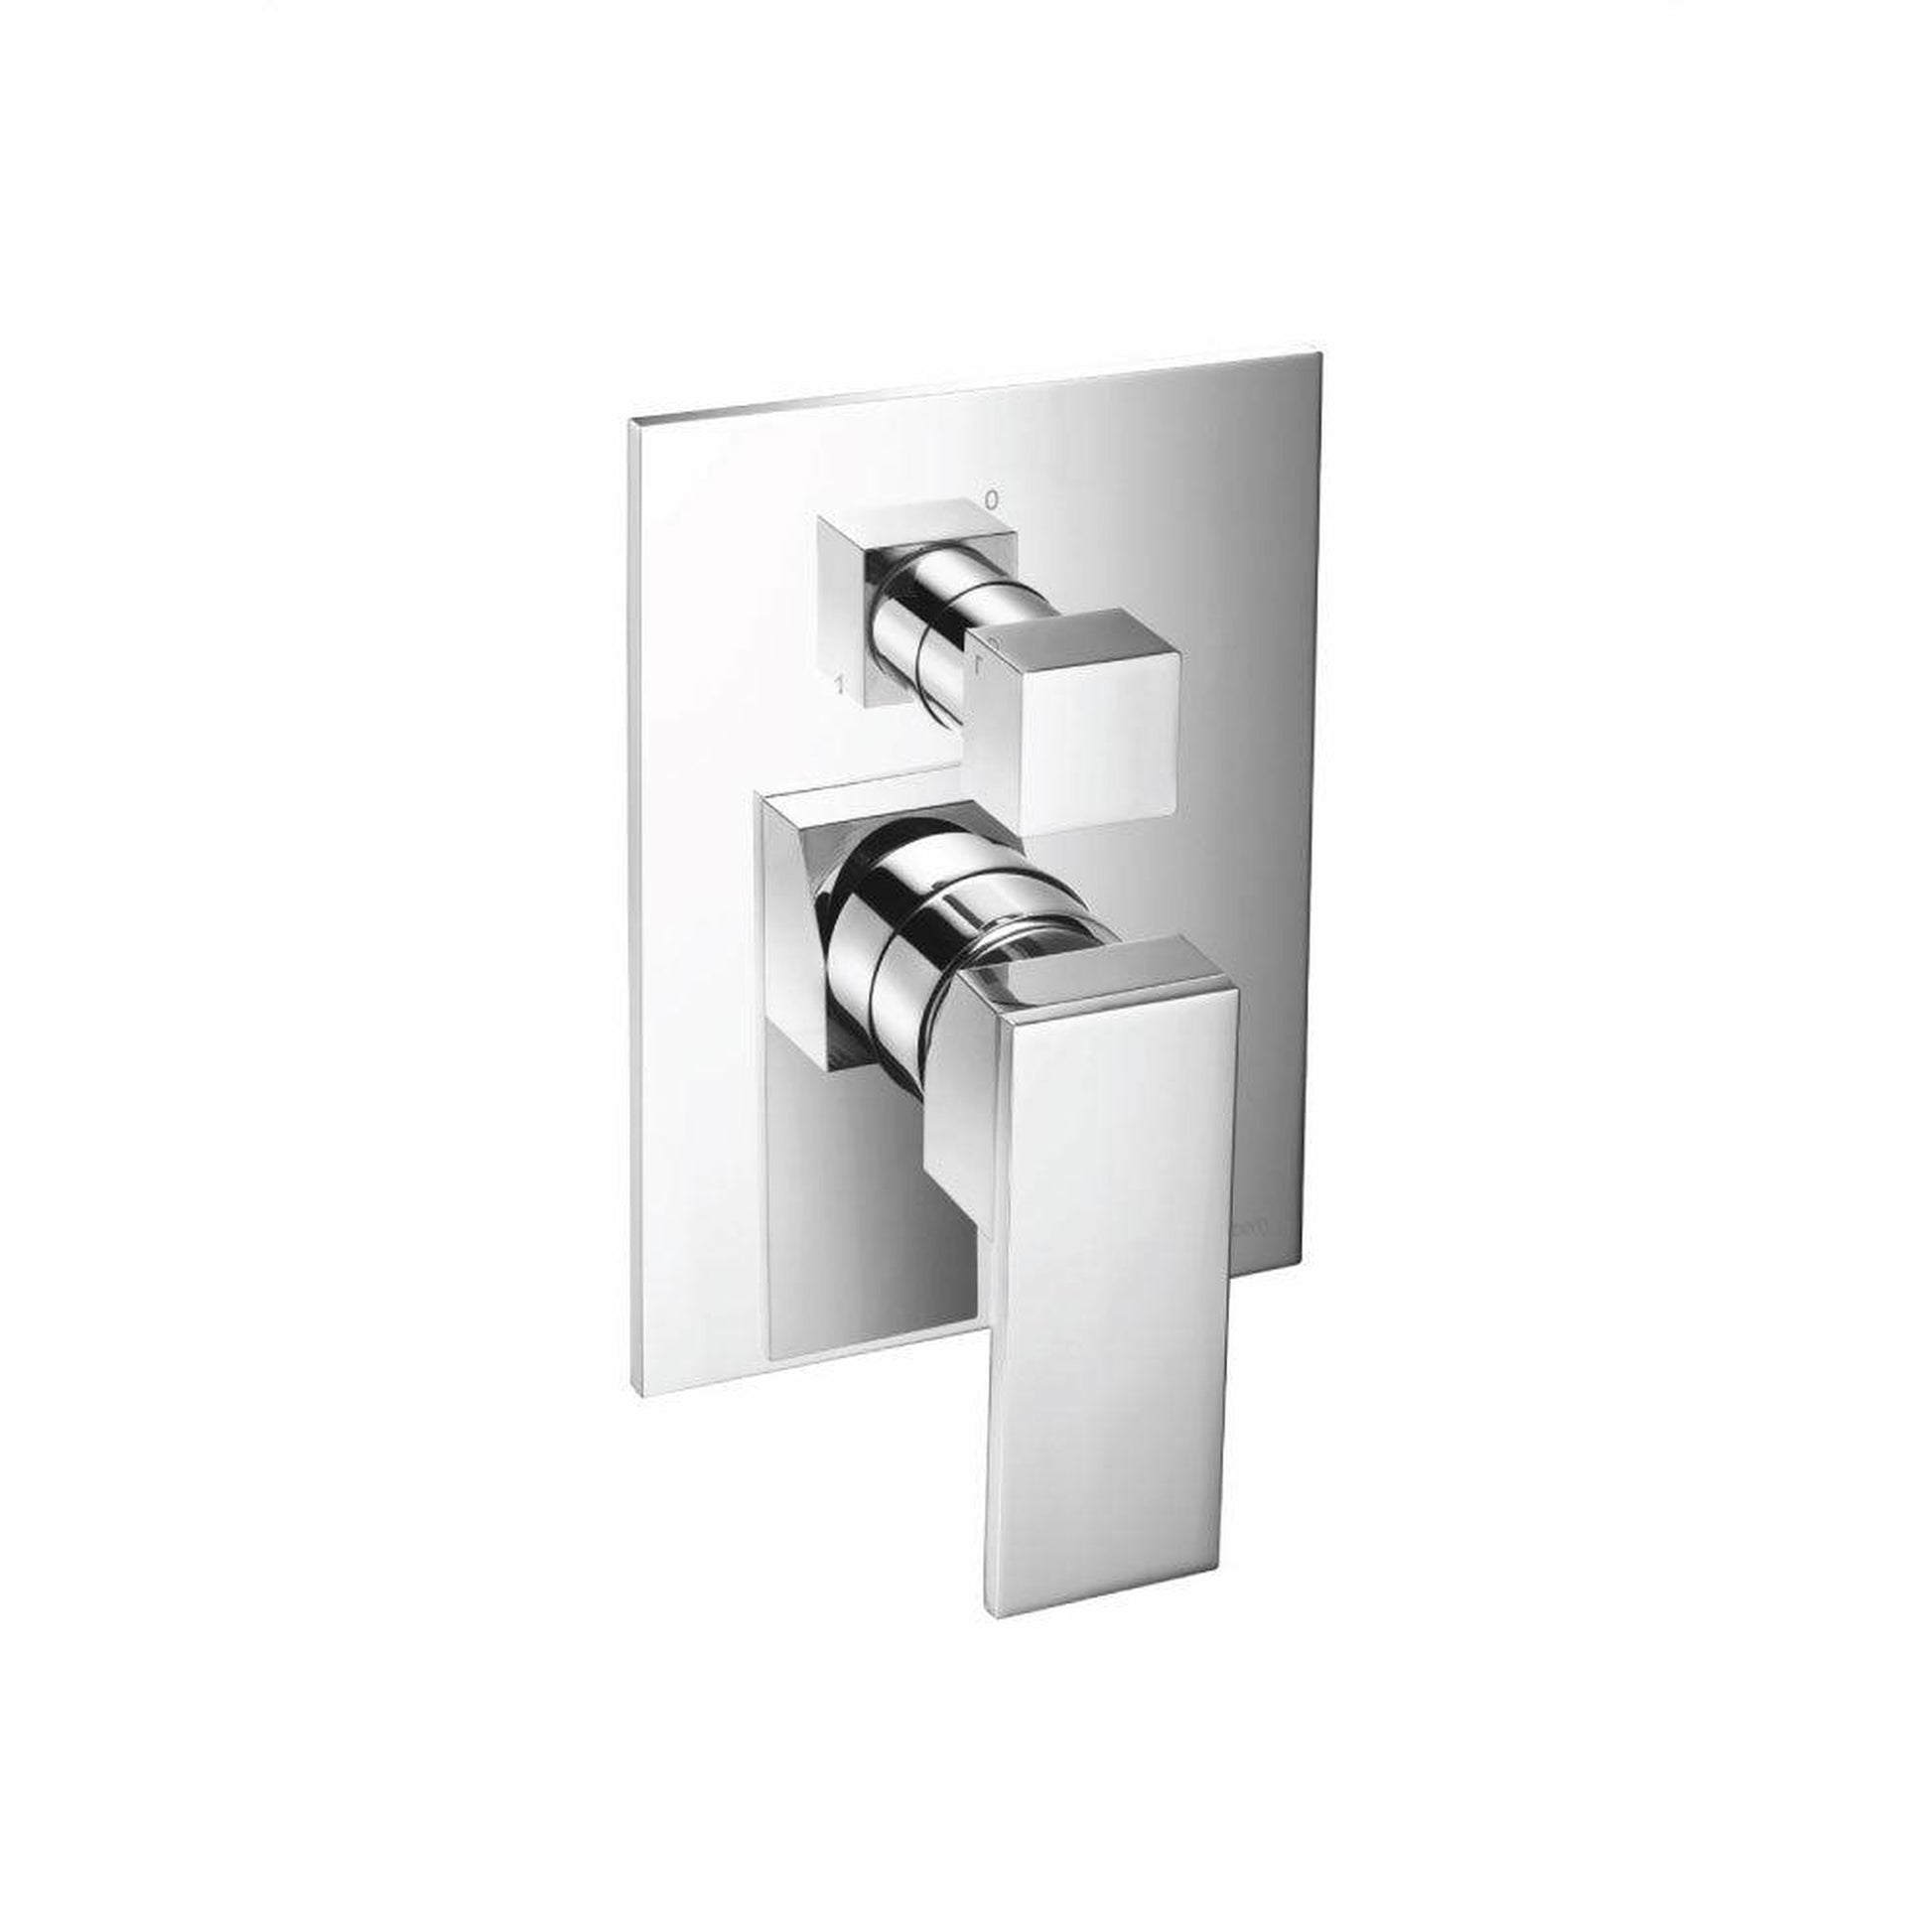 Isenberg Serie 160 Two Output Tub / Shower Trim With Pressure Balance Valve and Integrated 2-Way Diverter in Chrome